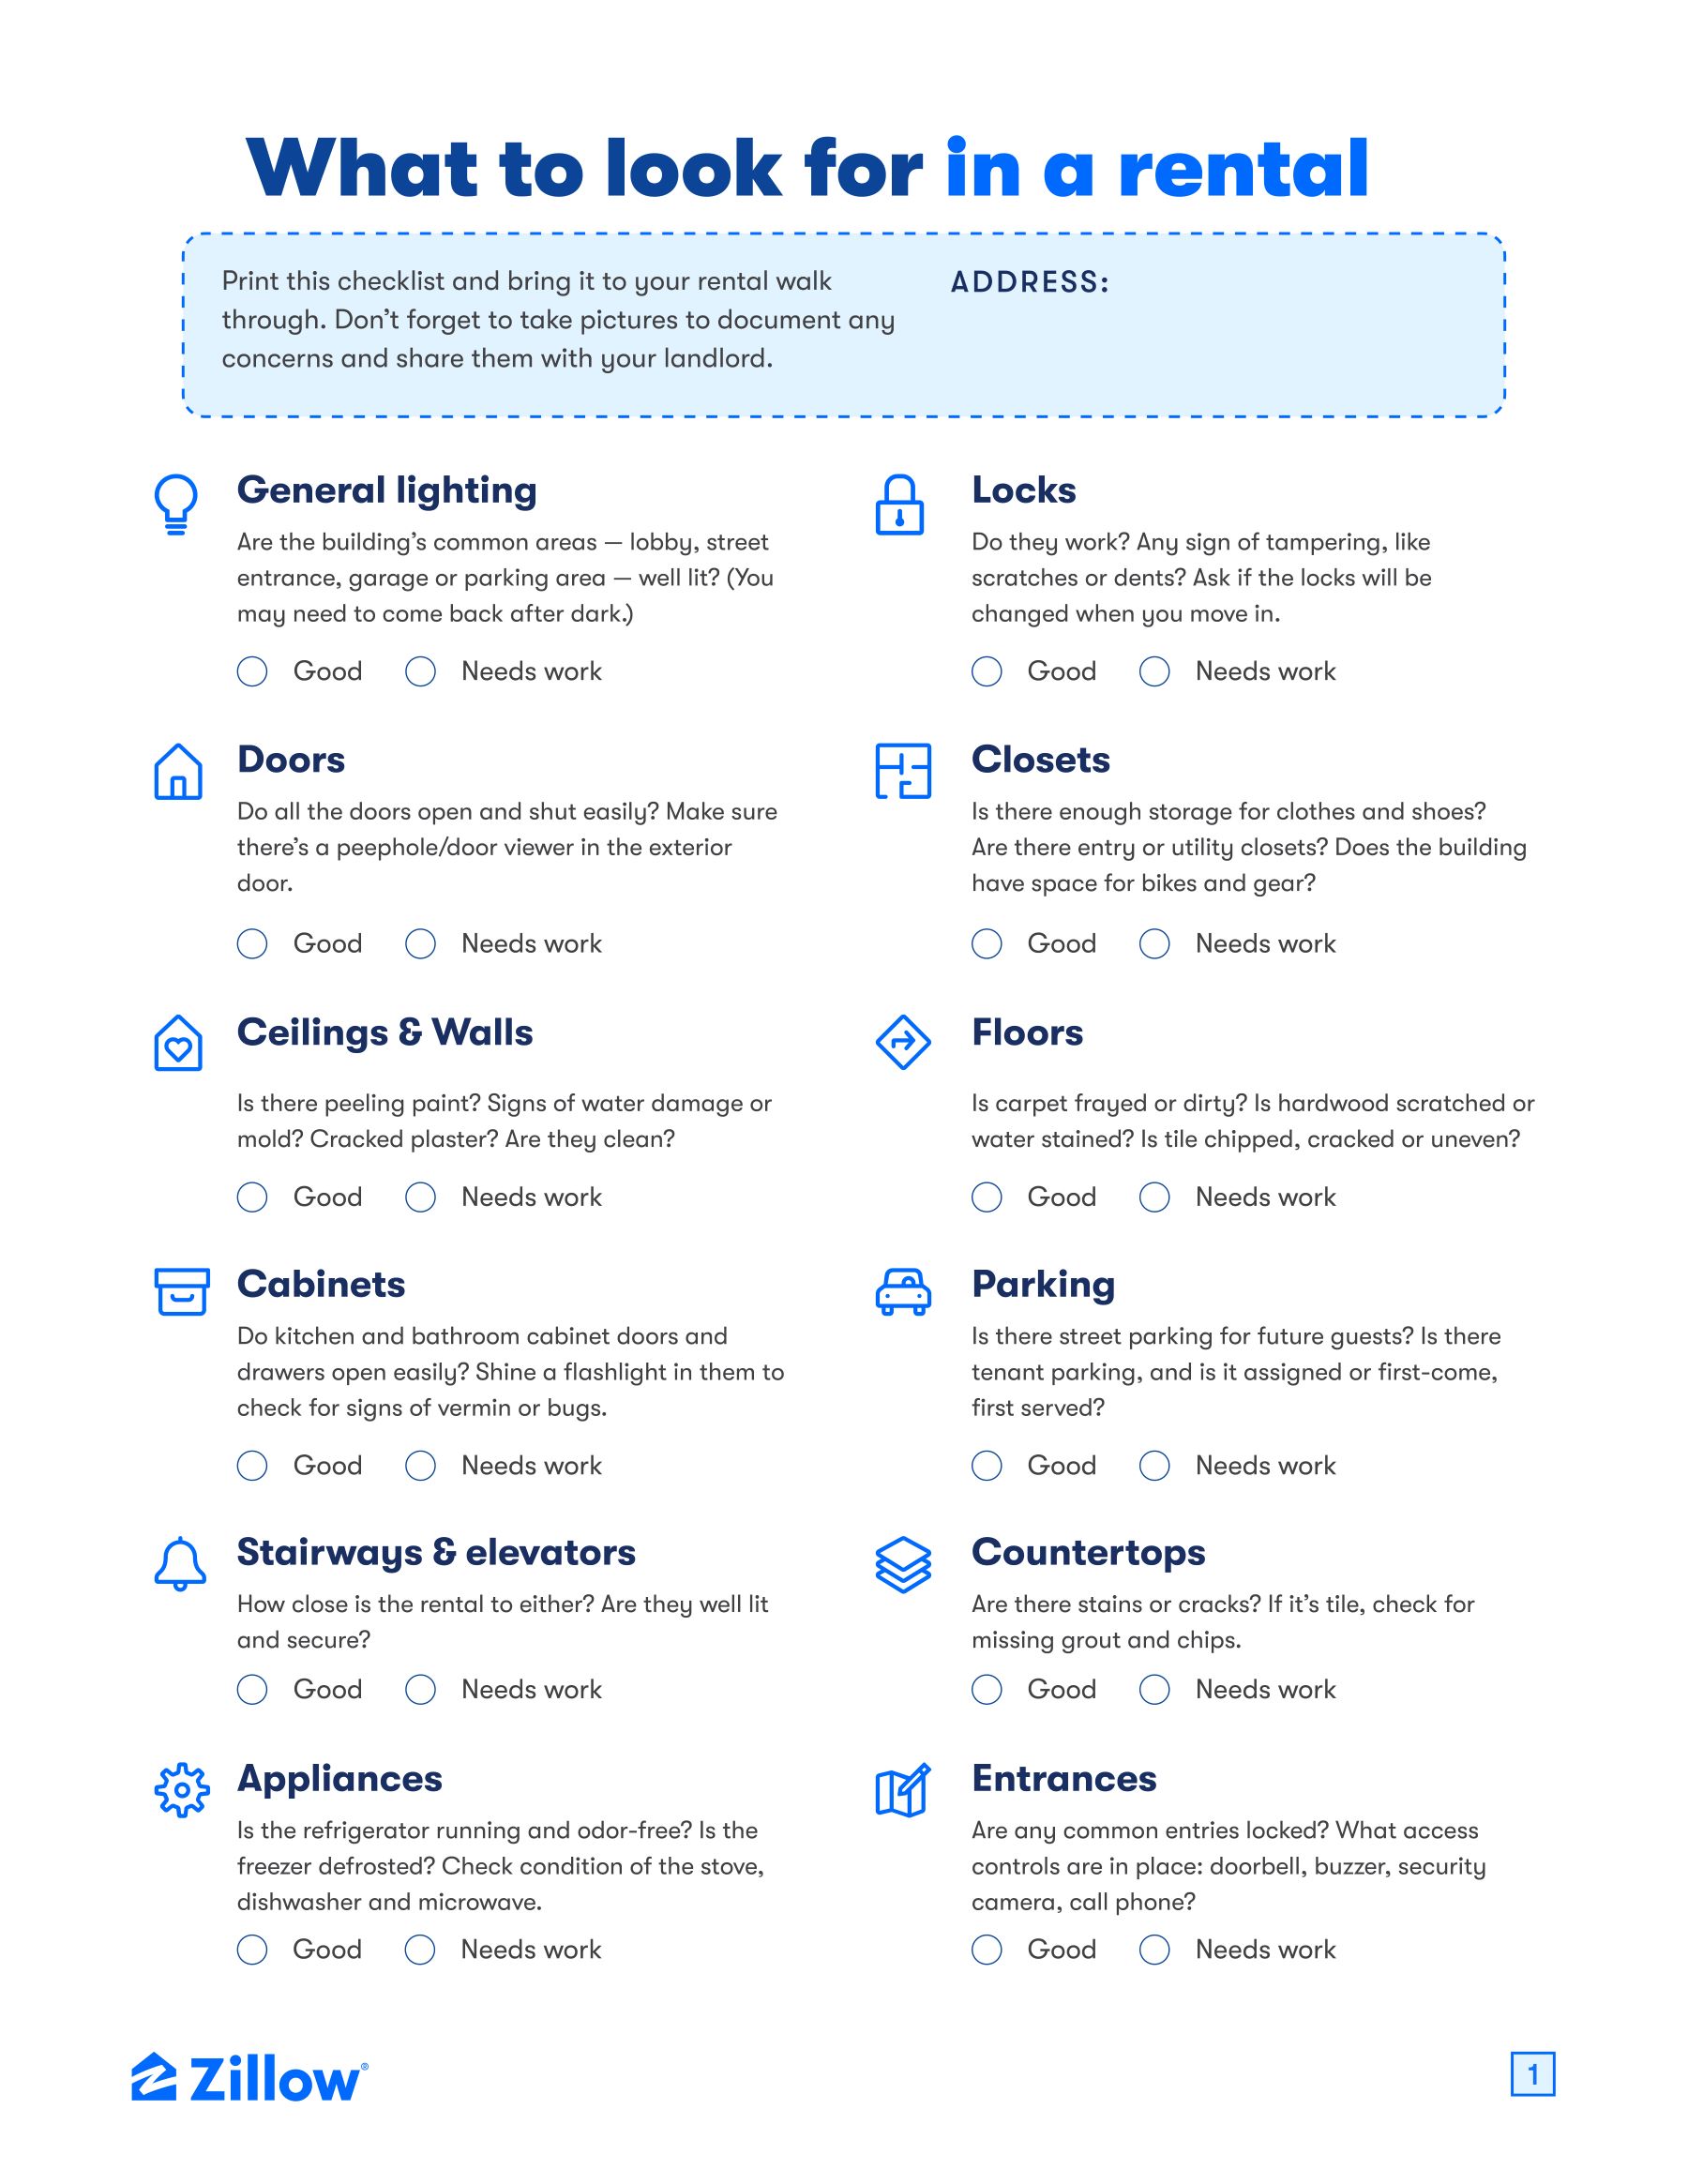 apartment-walkthrough-checklist-25-essential-items-to-review-zillow